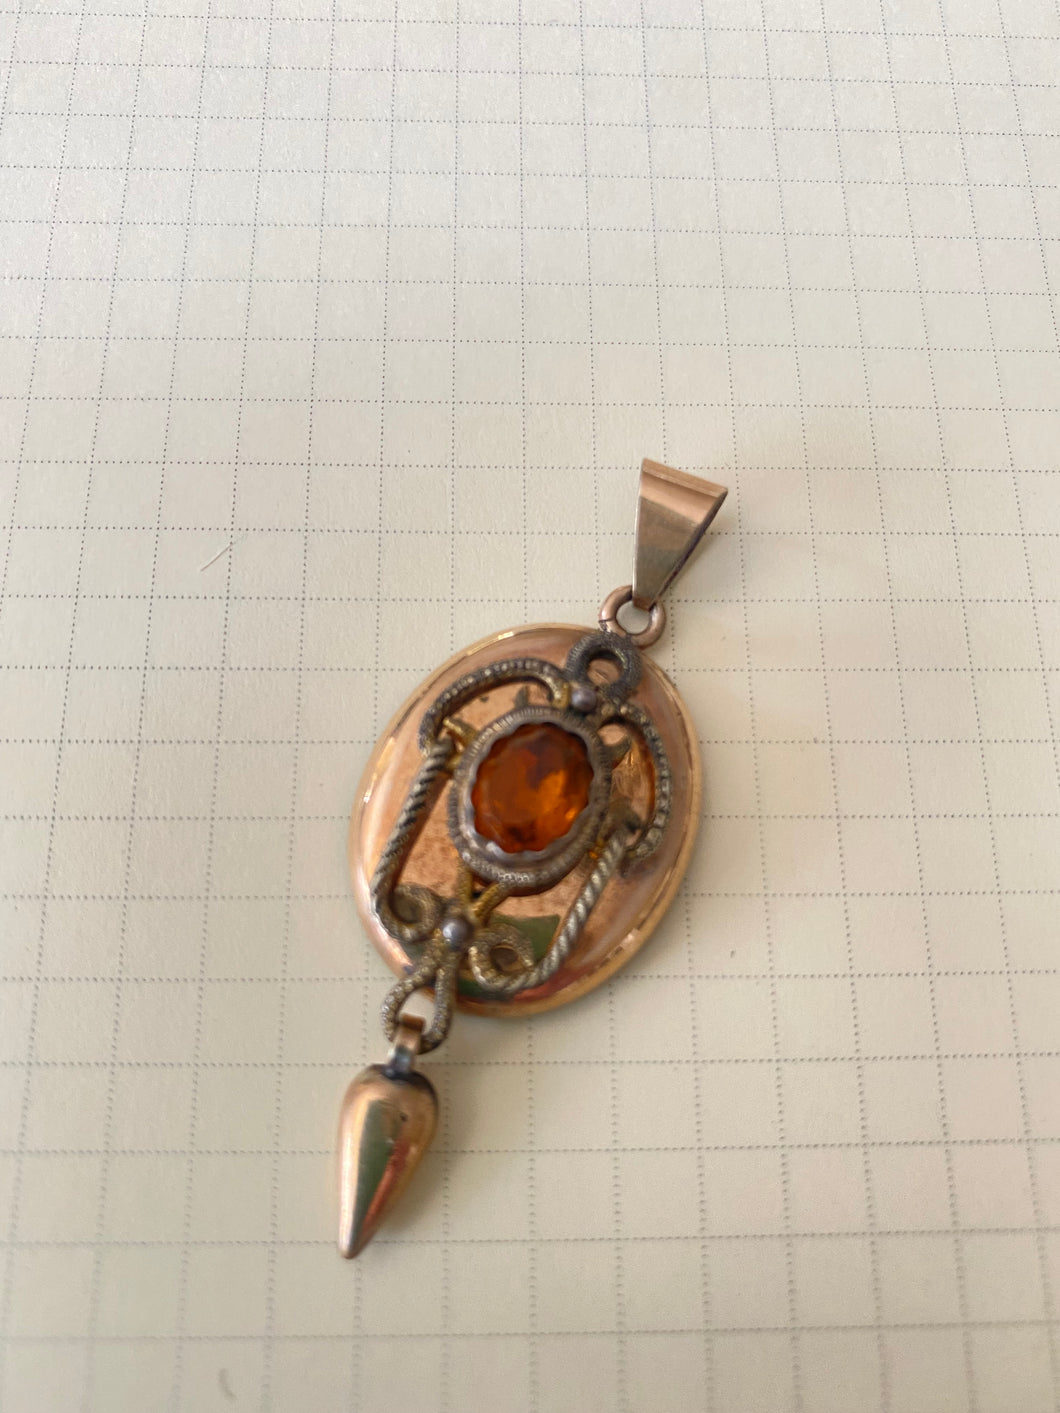 Vintage 14K Gold Gold Pendant Locket with Citrine Stone - The Curatorial Dept.